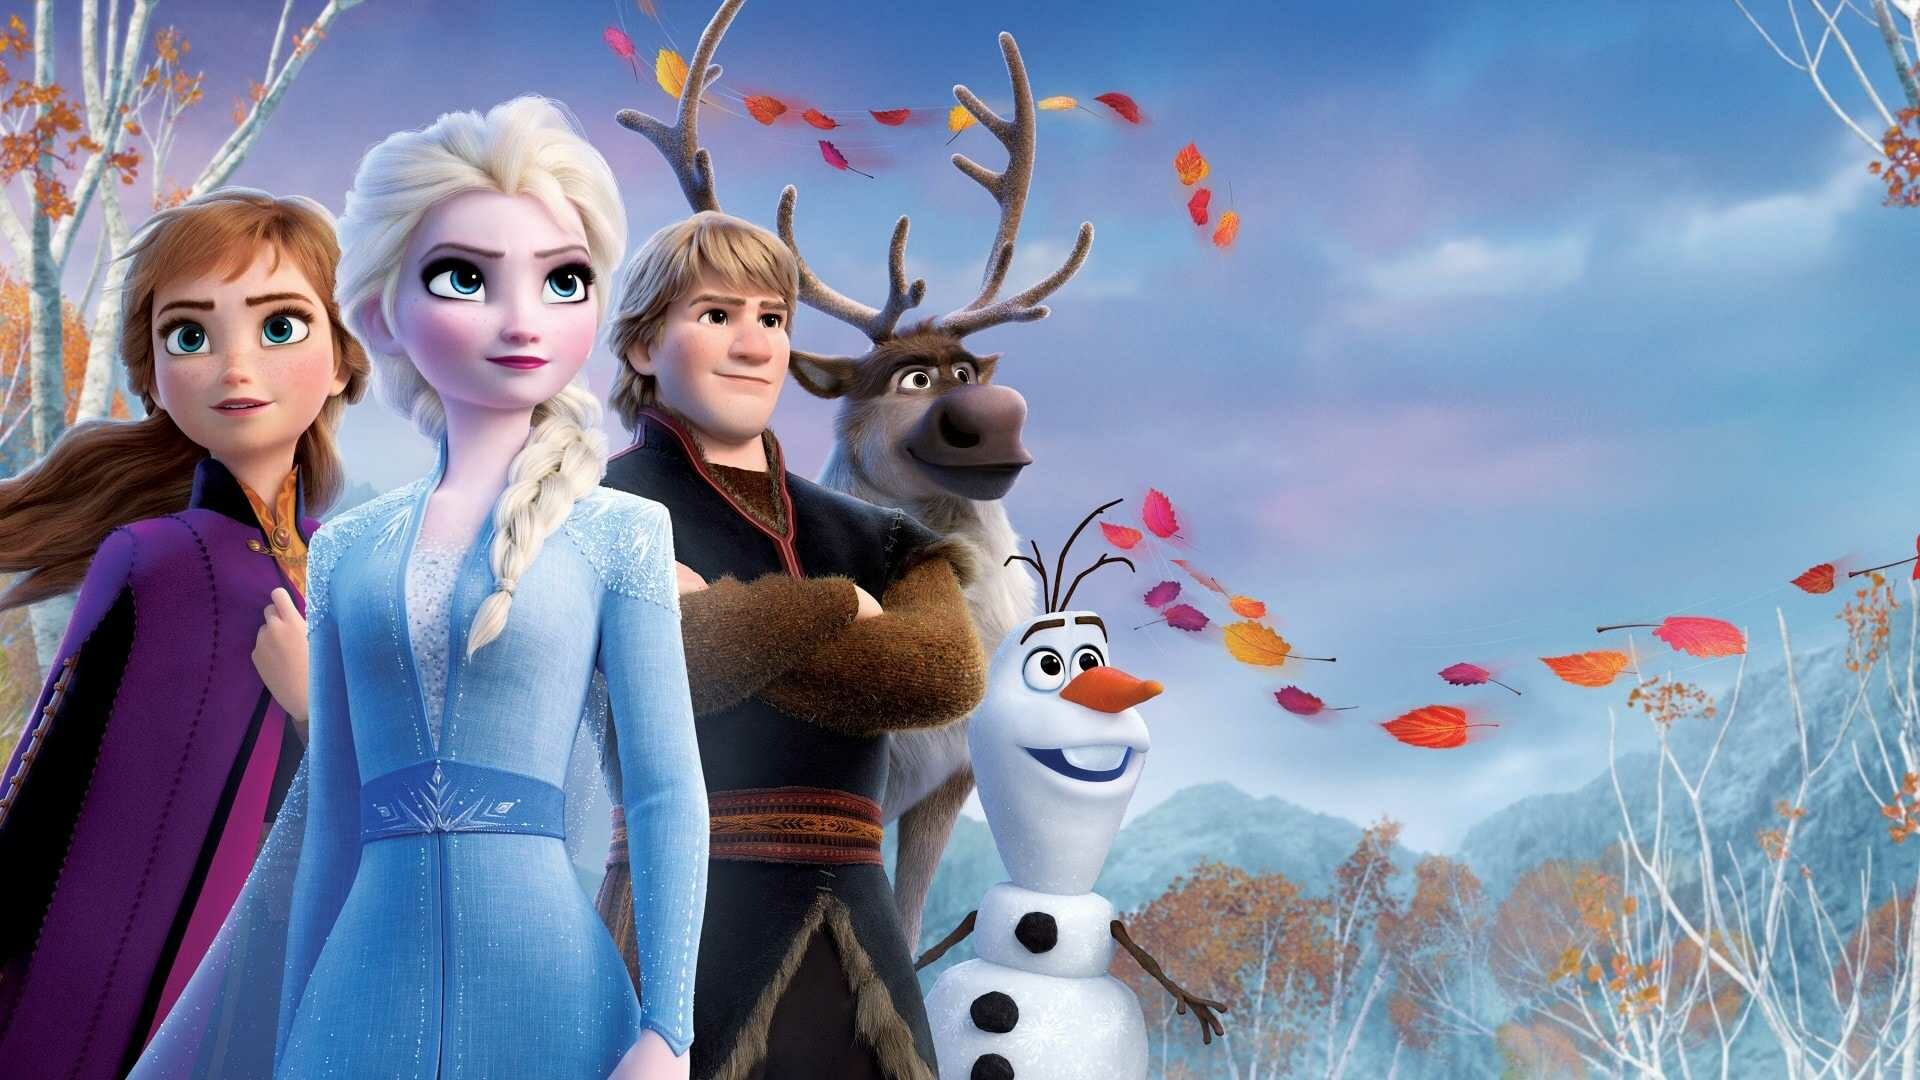 Frozen: An animated musical, Distributed by Walt Disney Studios Motion Pictures. 1920x1080 Full HD Wallpaper.